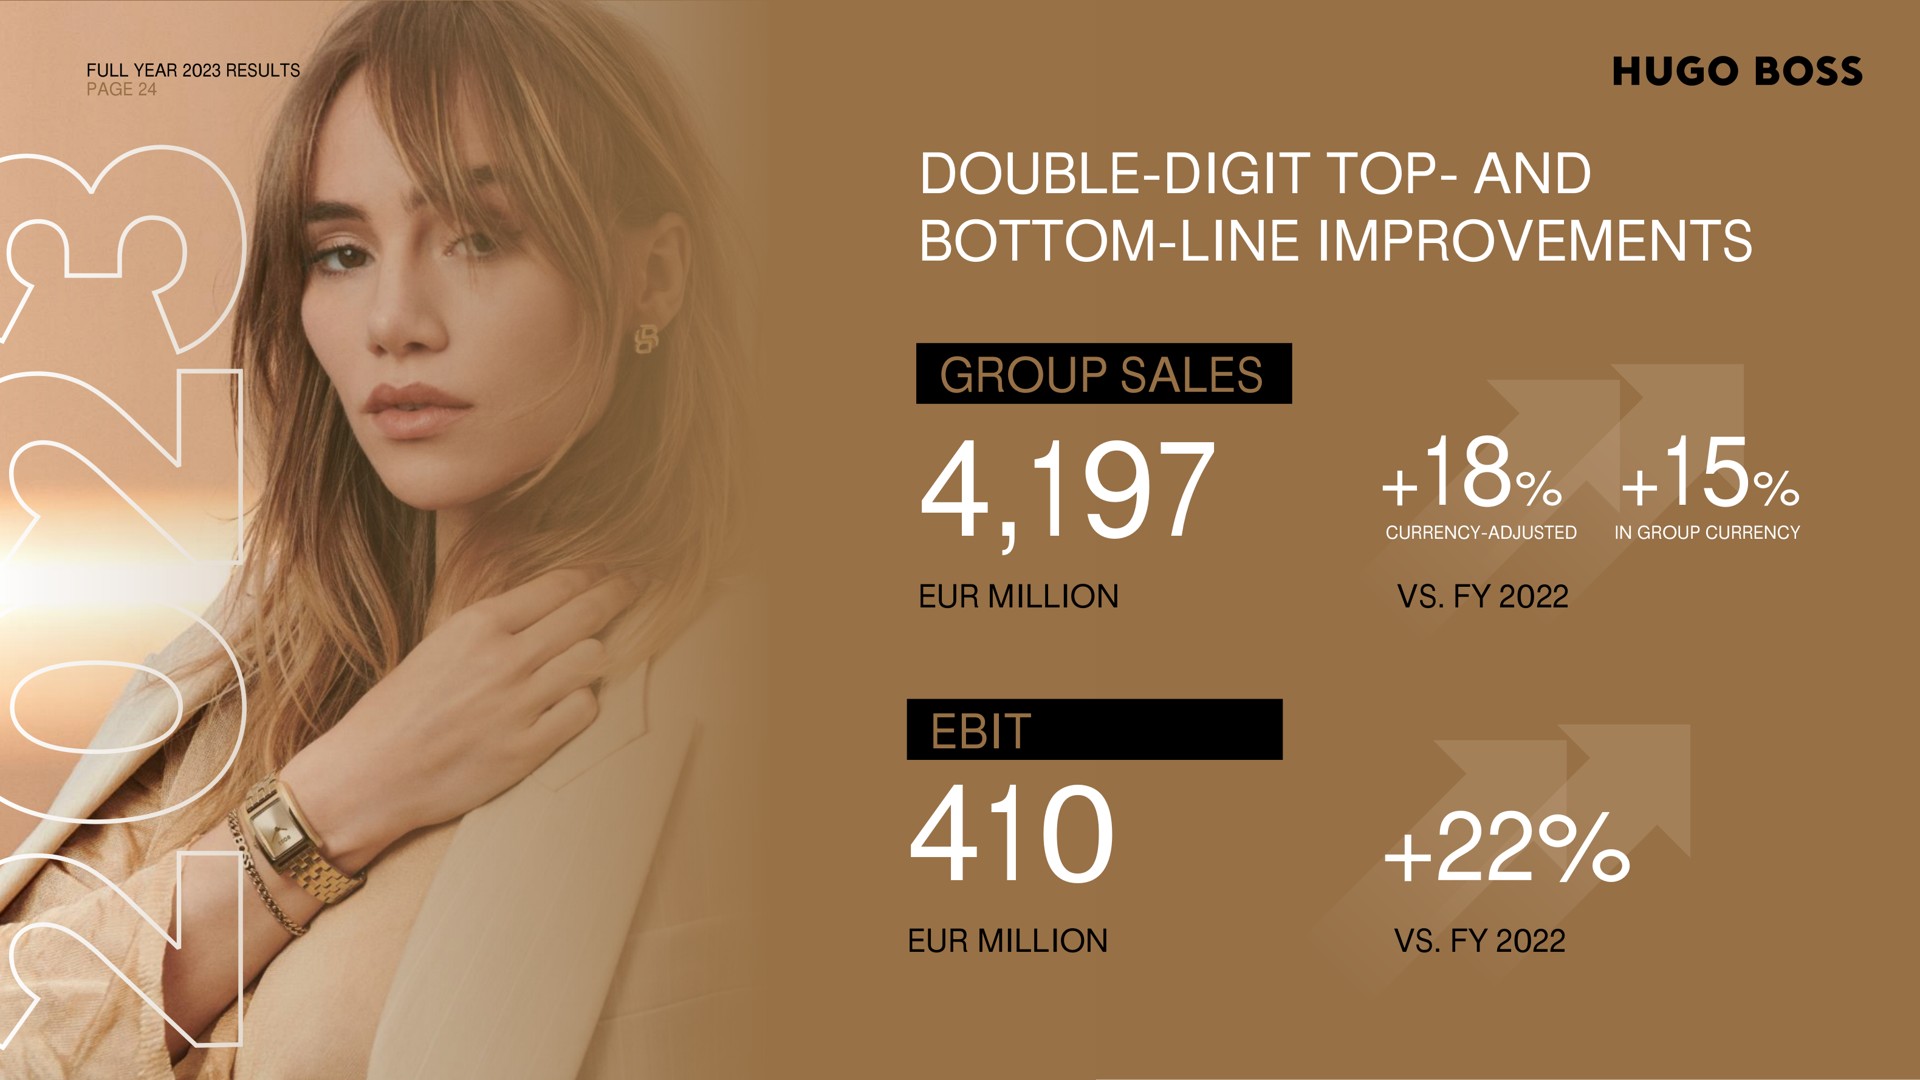 double digit top and bottom line improvements group sales million million ake aas mate | Hugo Boss